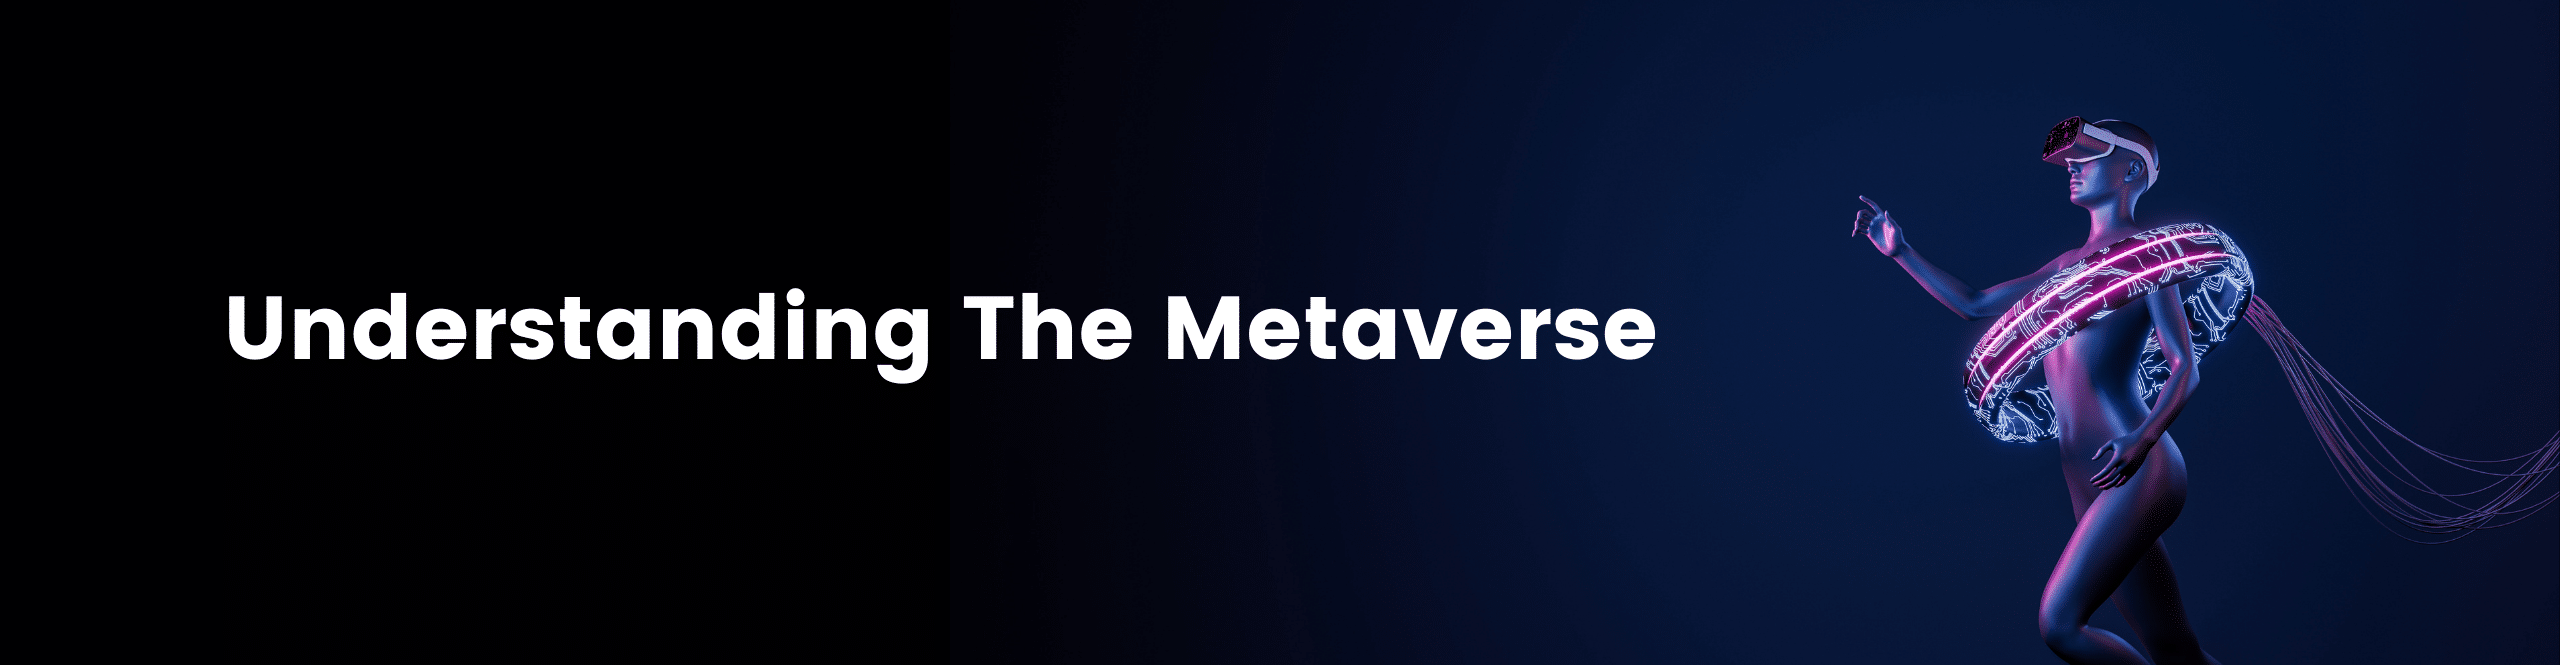 Proceed with Caution into the Metaverse